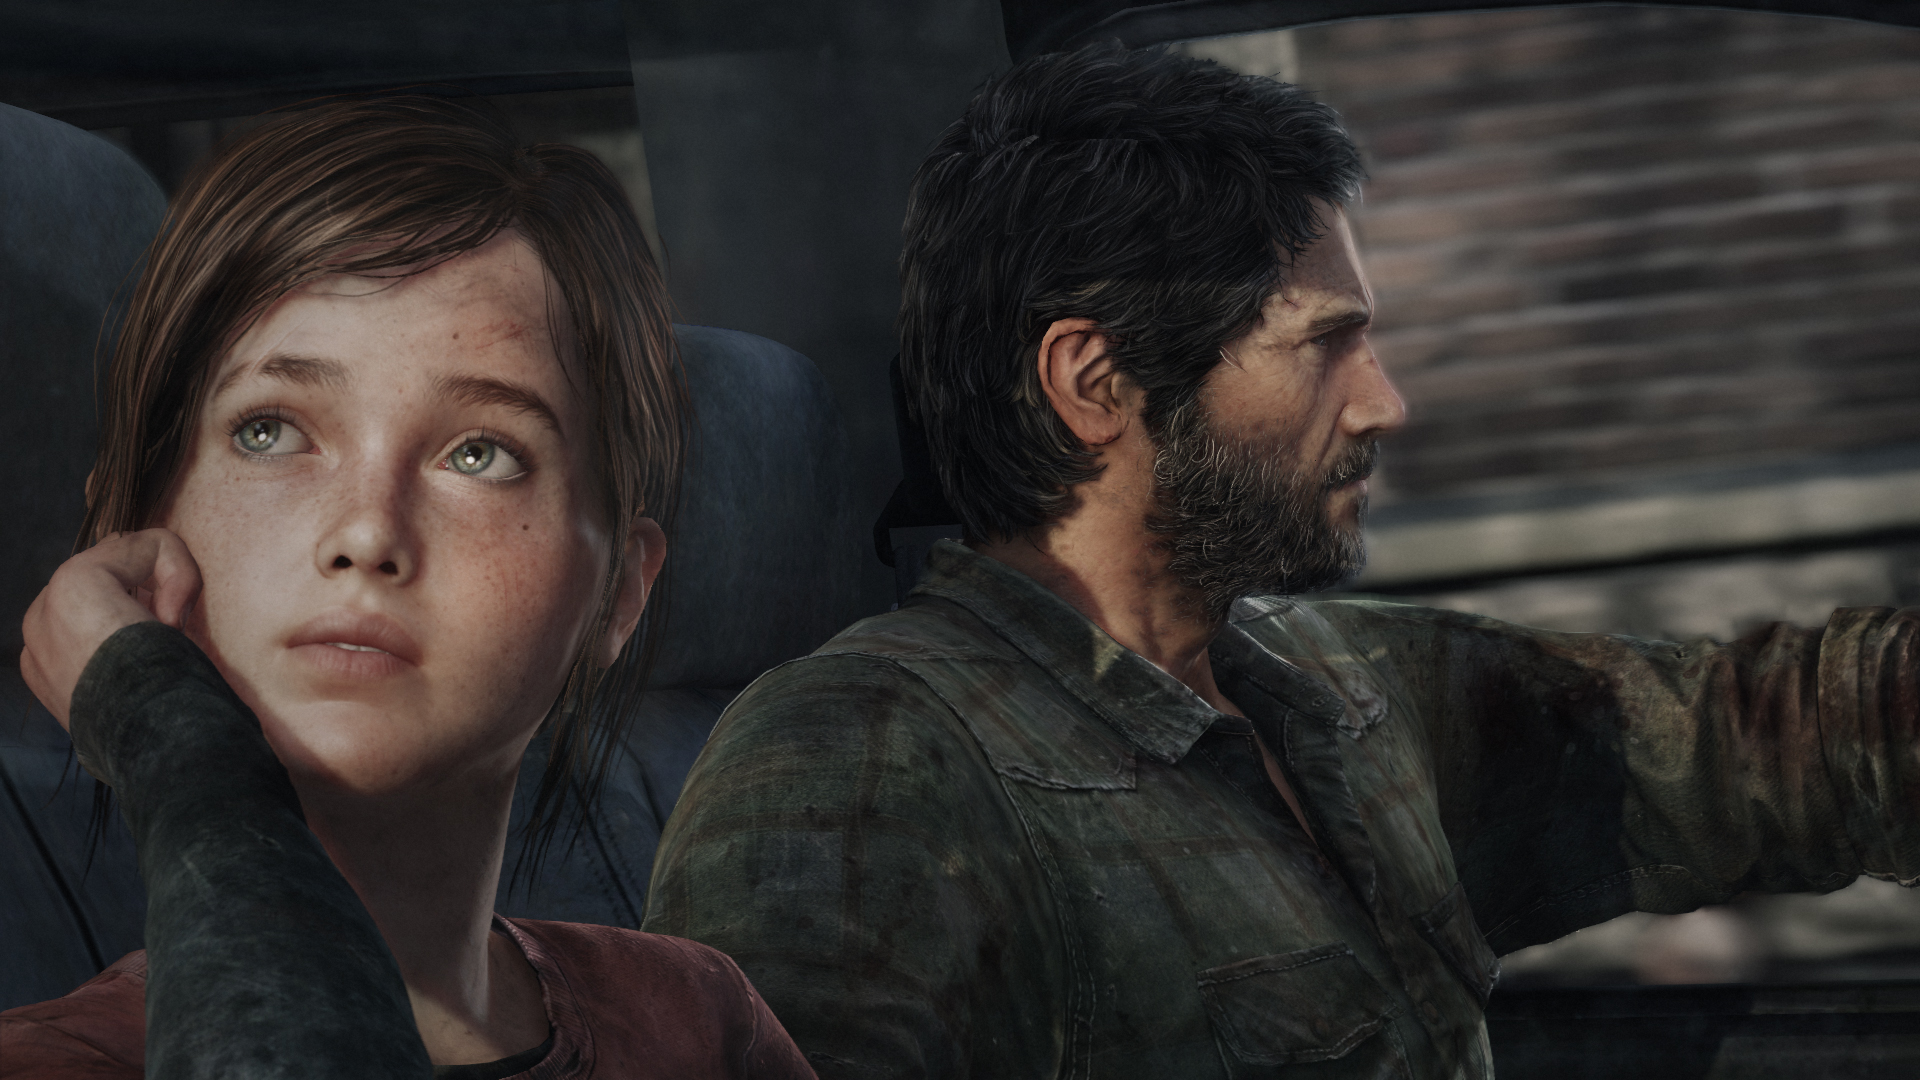 The Last of Us Remastered will run at 4K on PS4 Pro